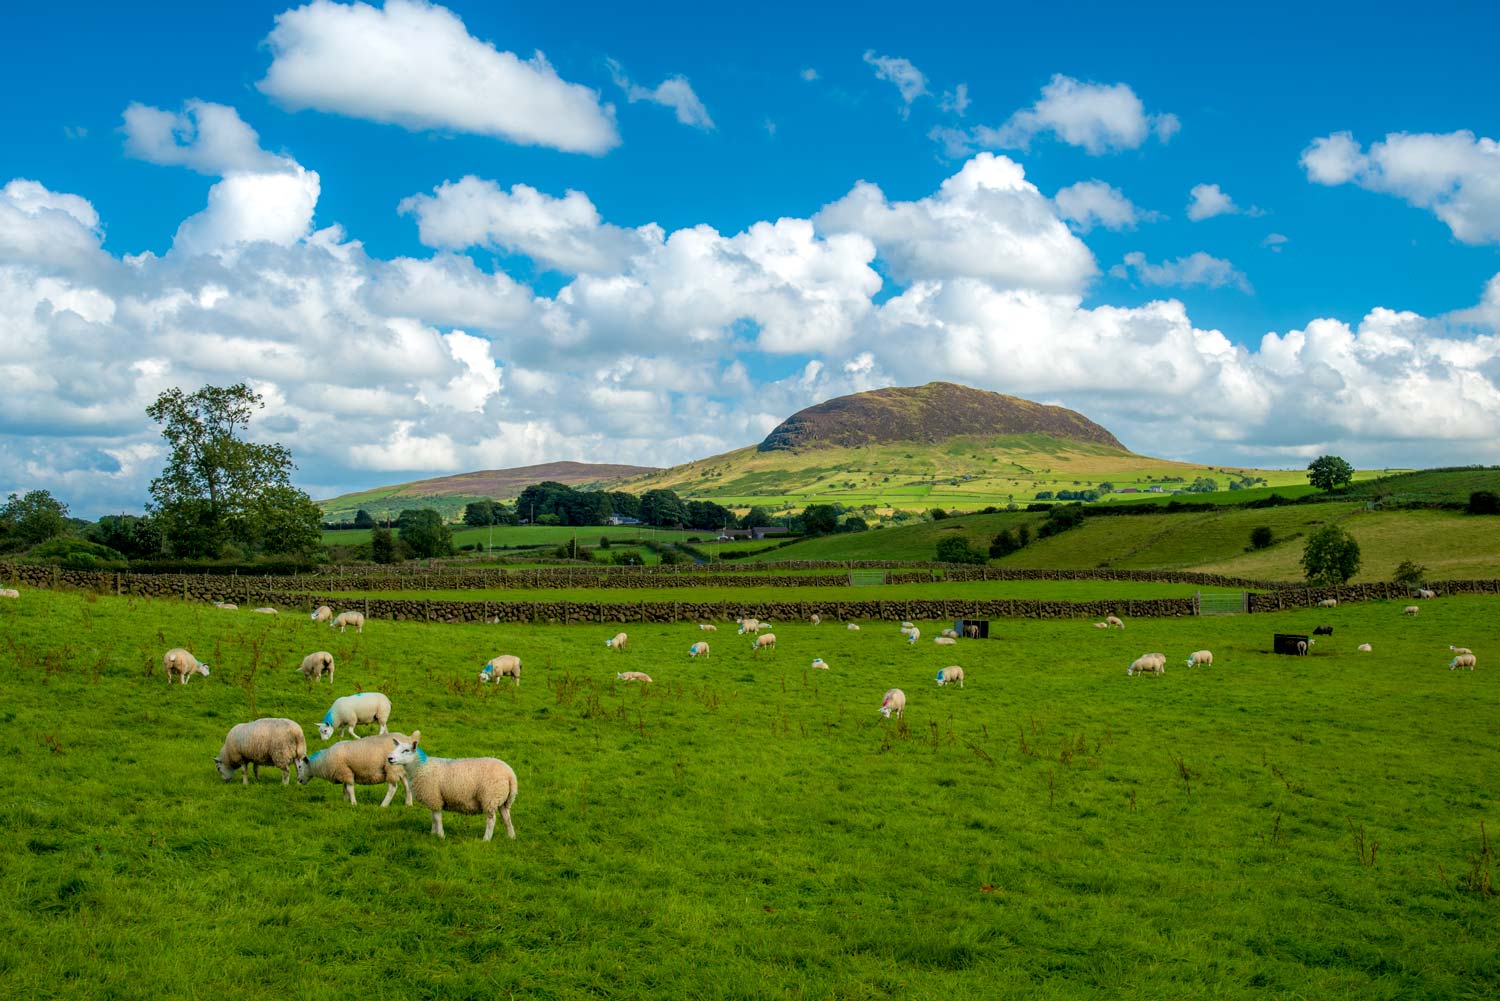 Slemish Mountain County Antrim, where Patrick was held in captivity.